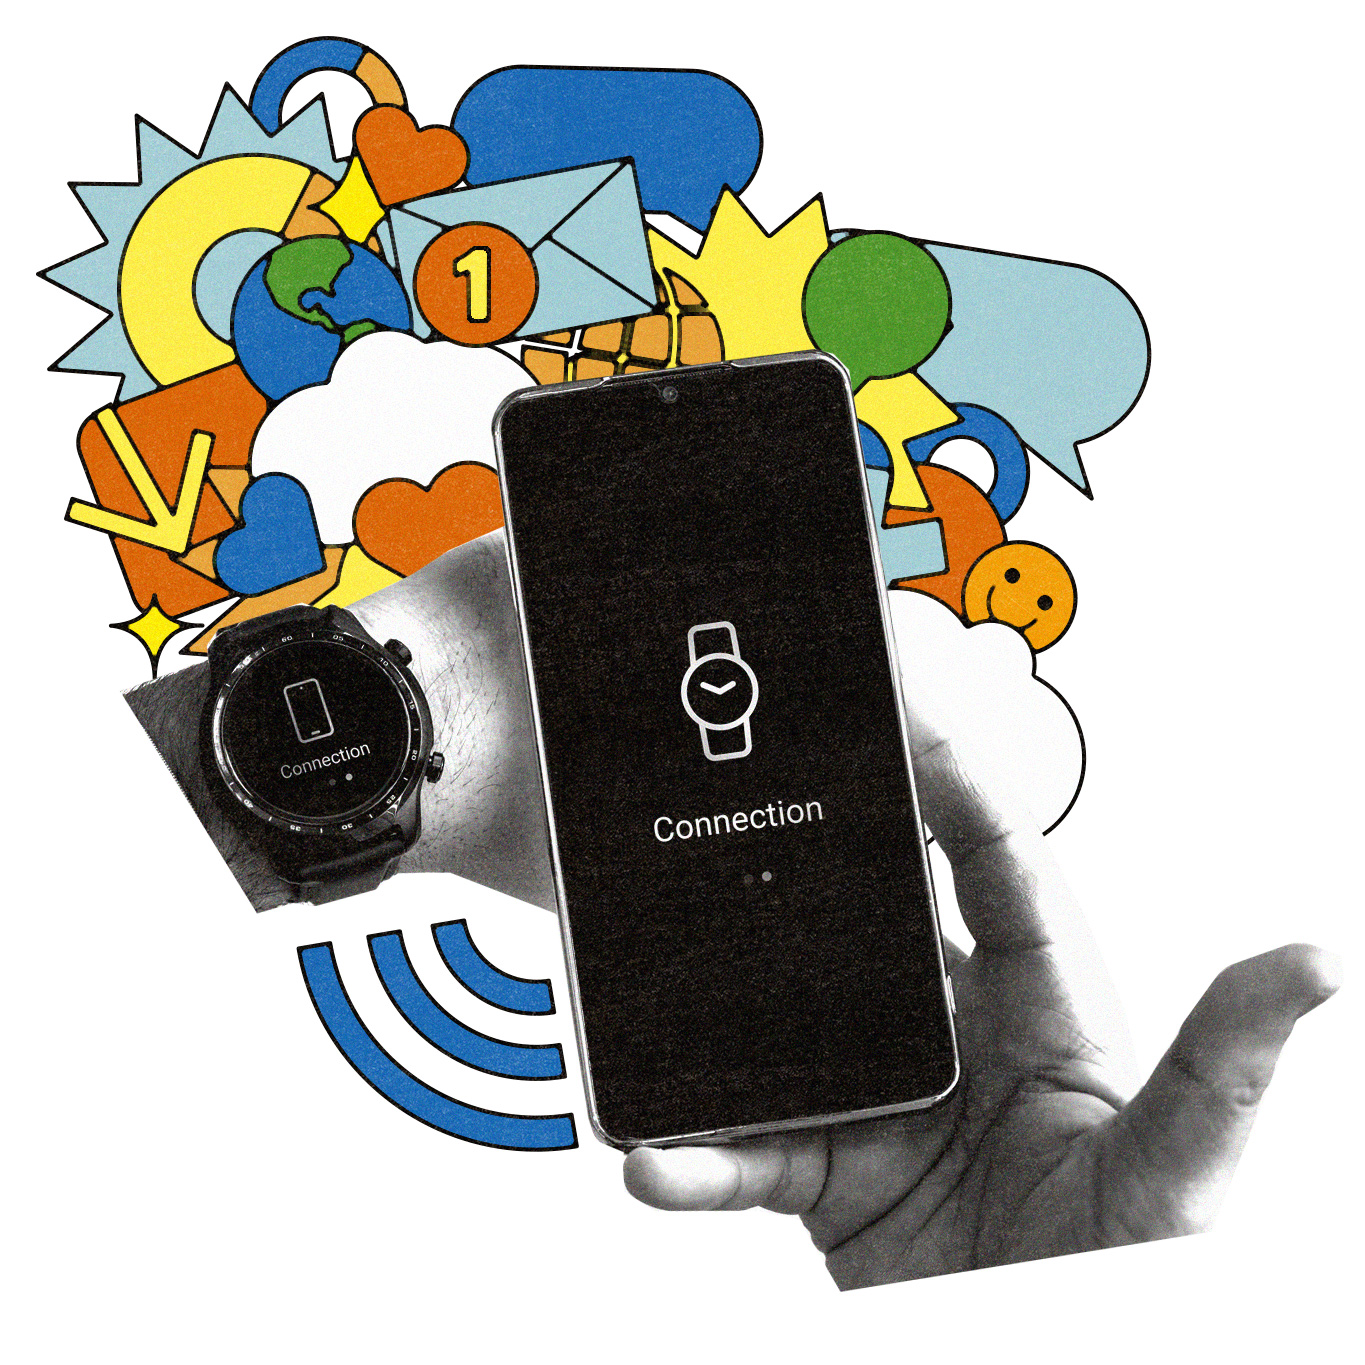 A smart watch with illustrated drawings.